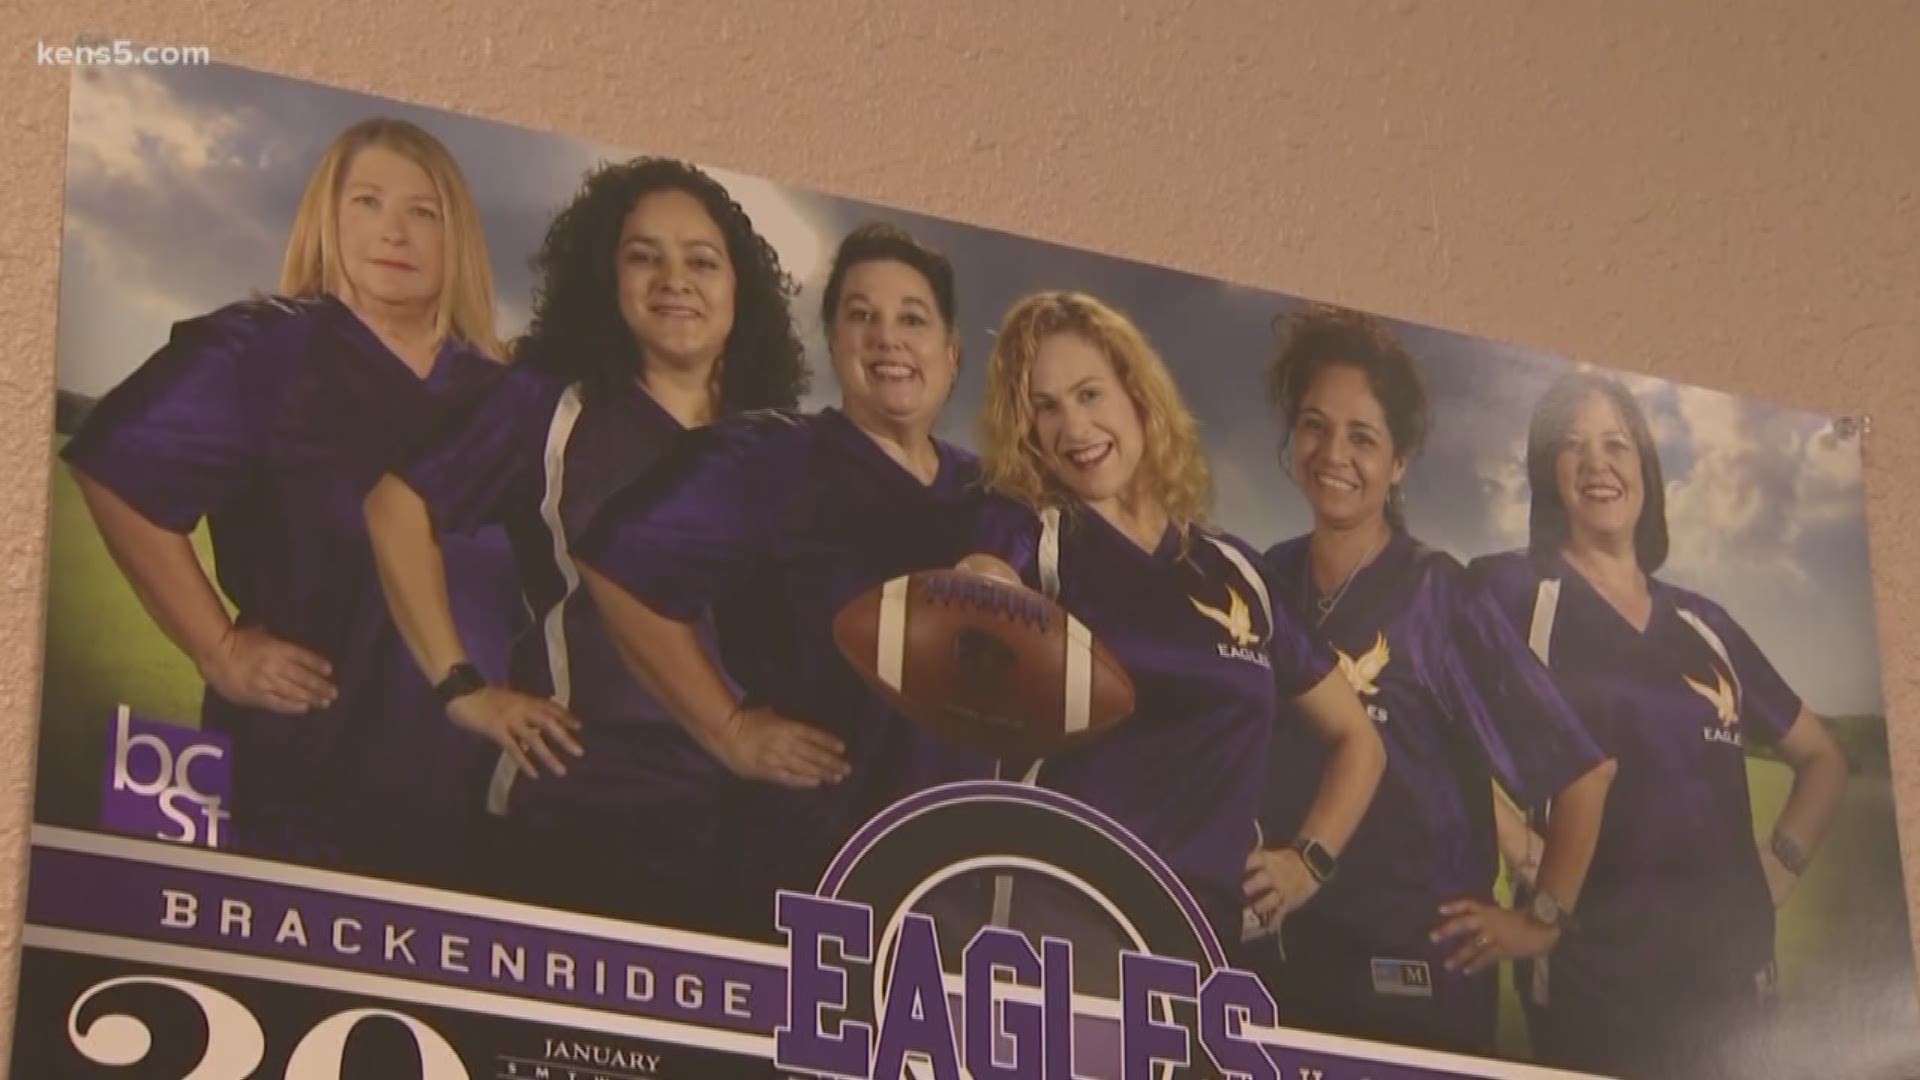 There are six leading ladies in the administration at Brackenridge High school who inspire students inside and outside of the classroom.